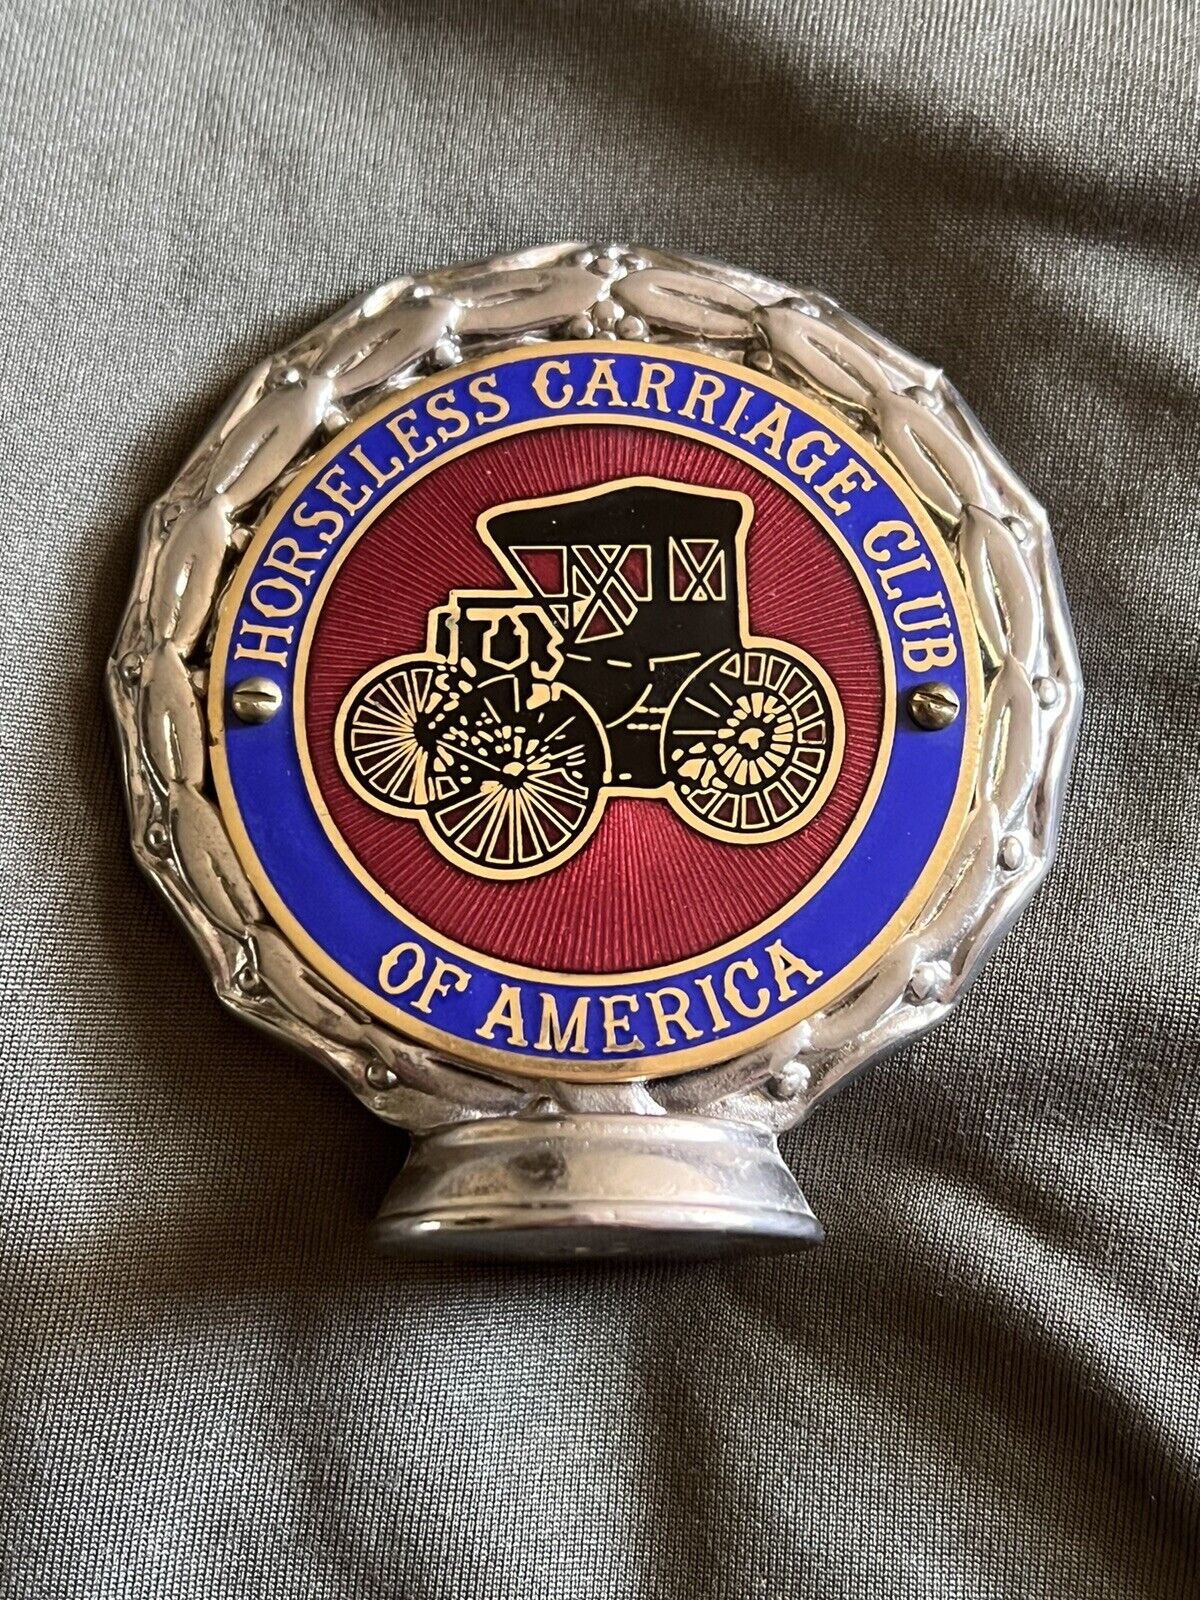 H.C.C.A. Horseless Carriage Club of America GRILL BADGE EMBLEM ORNAMENT METAL